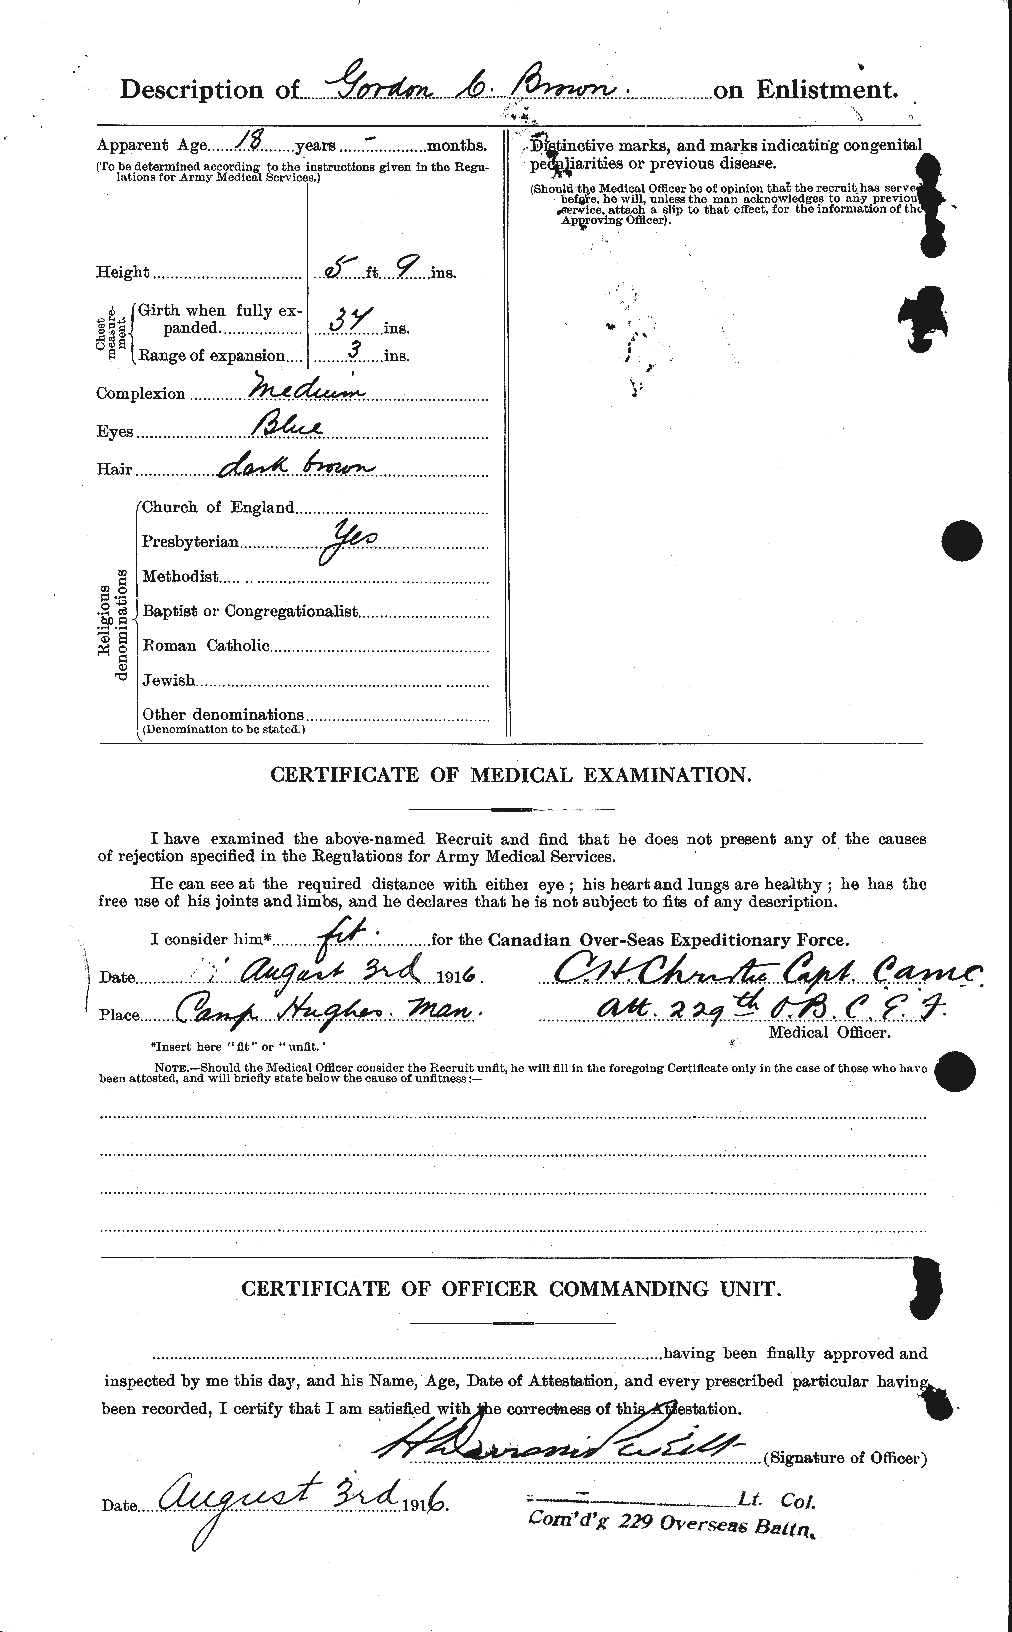 Personnel Records of the First World War - CEF 262629b